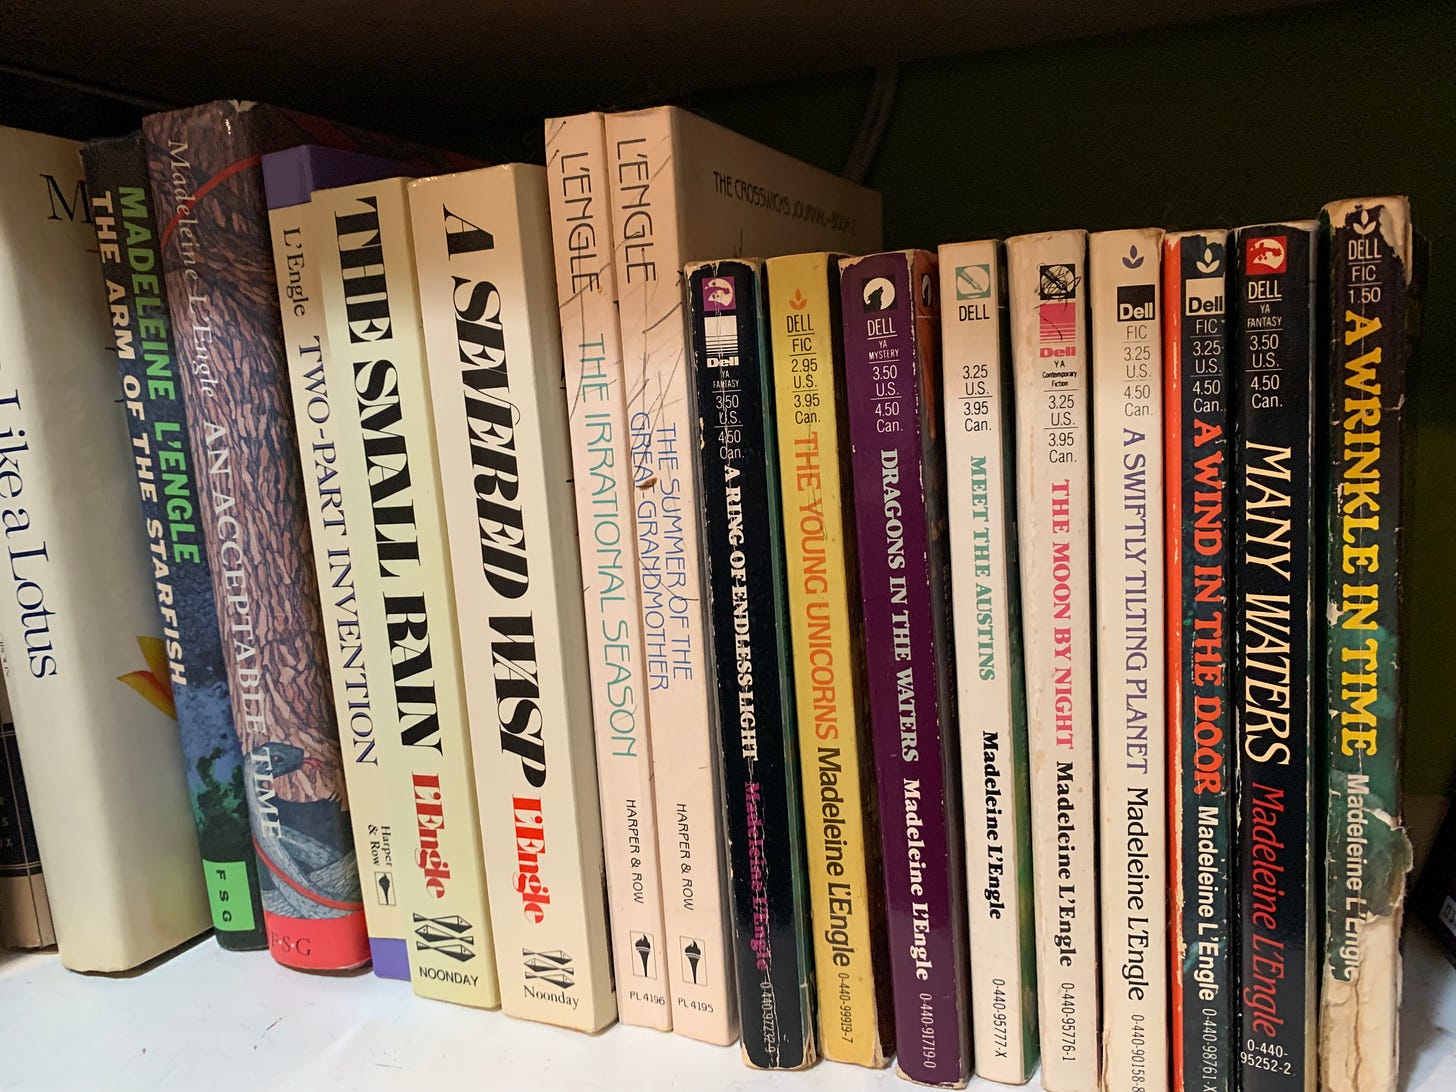 View of books spines on a shelf